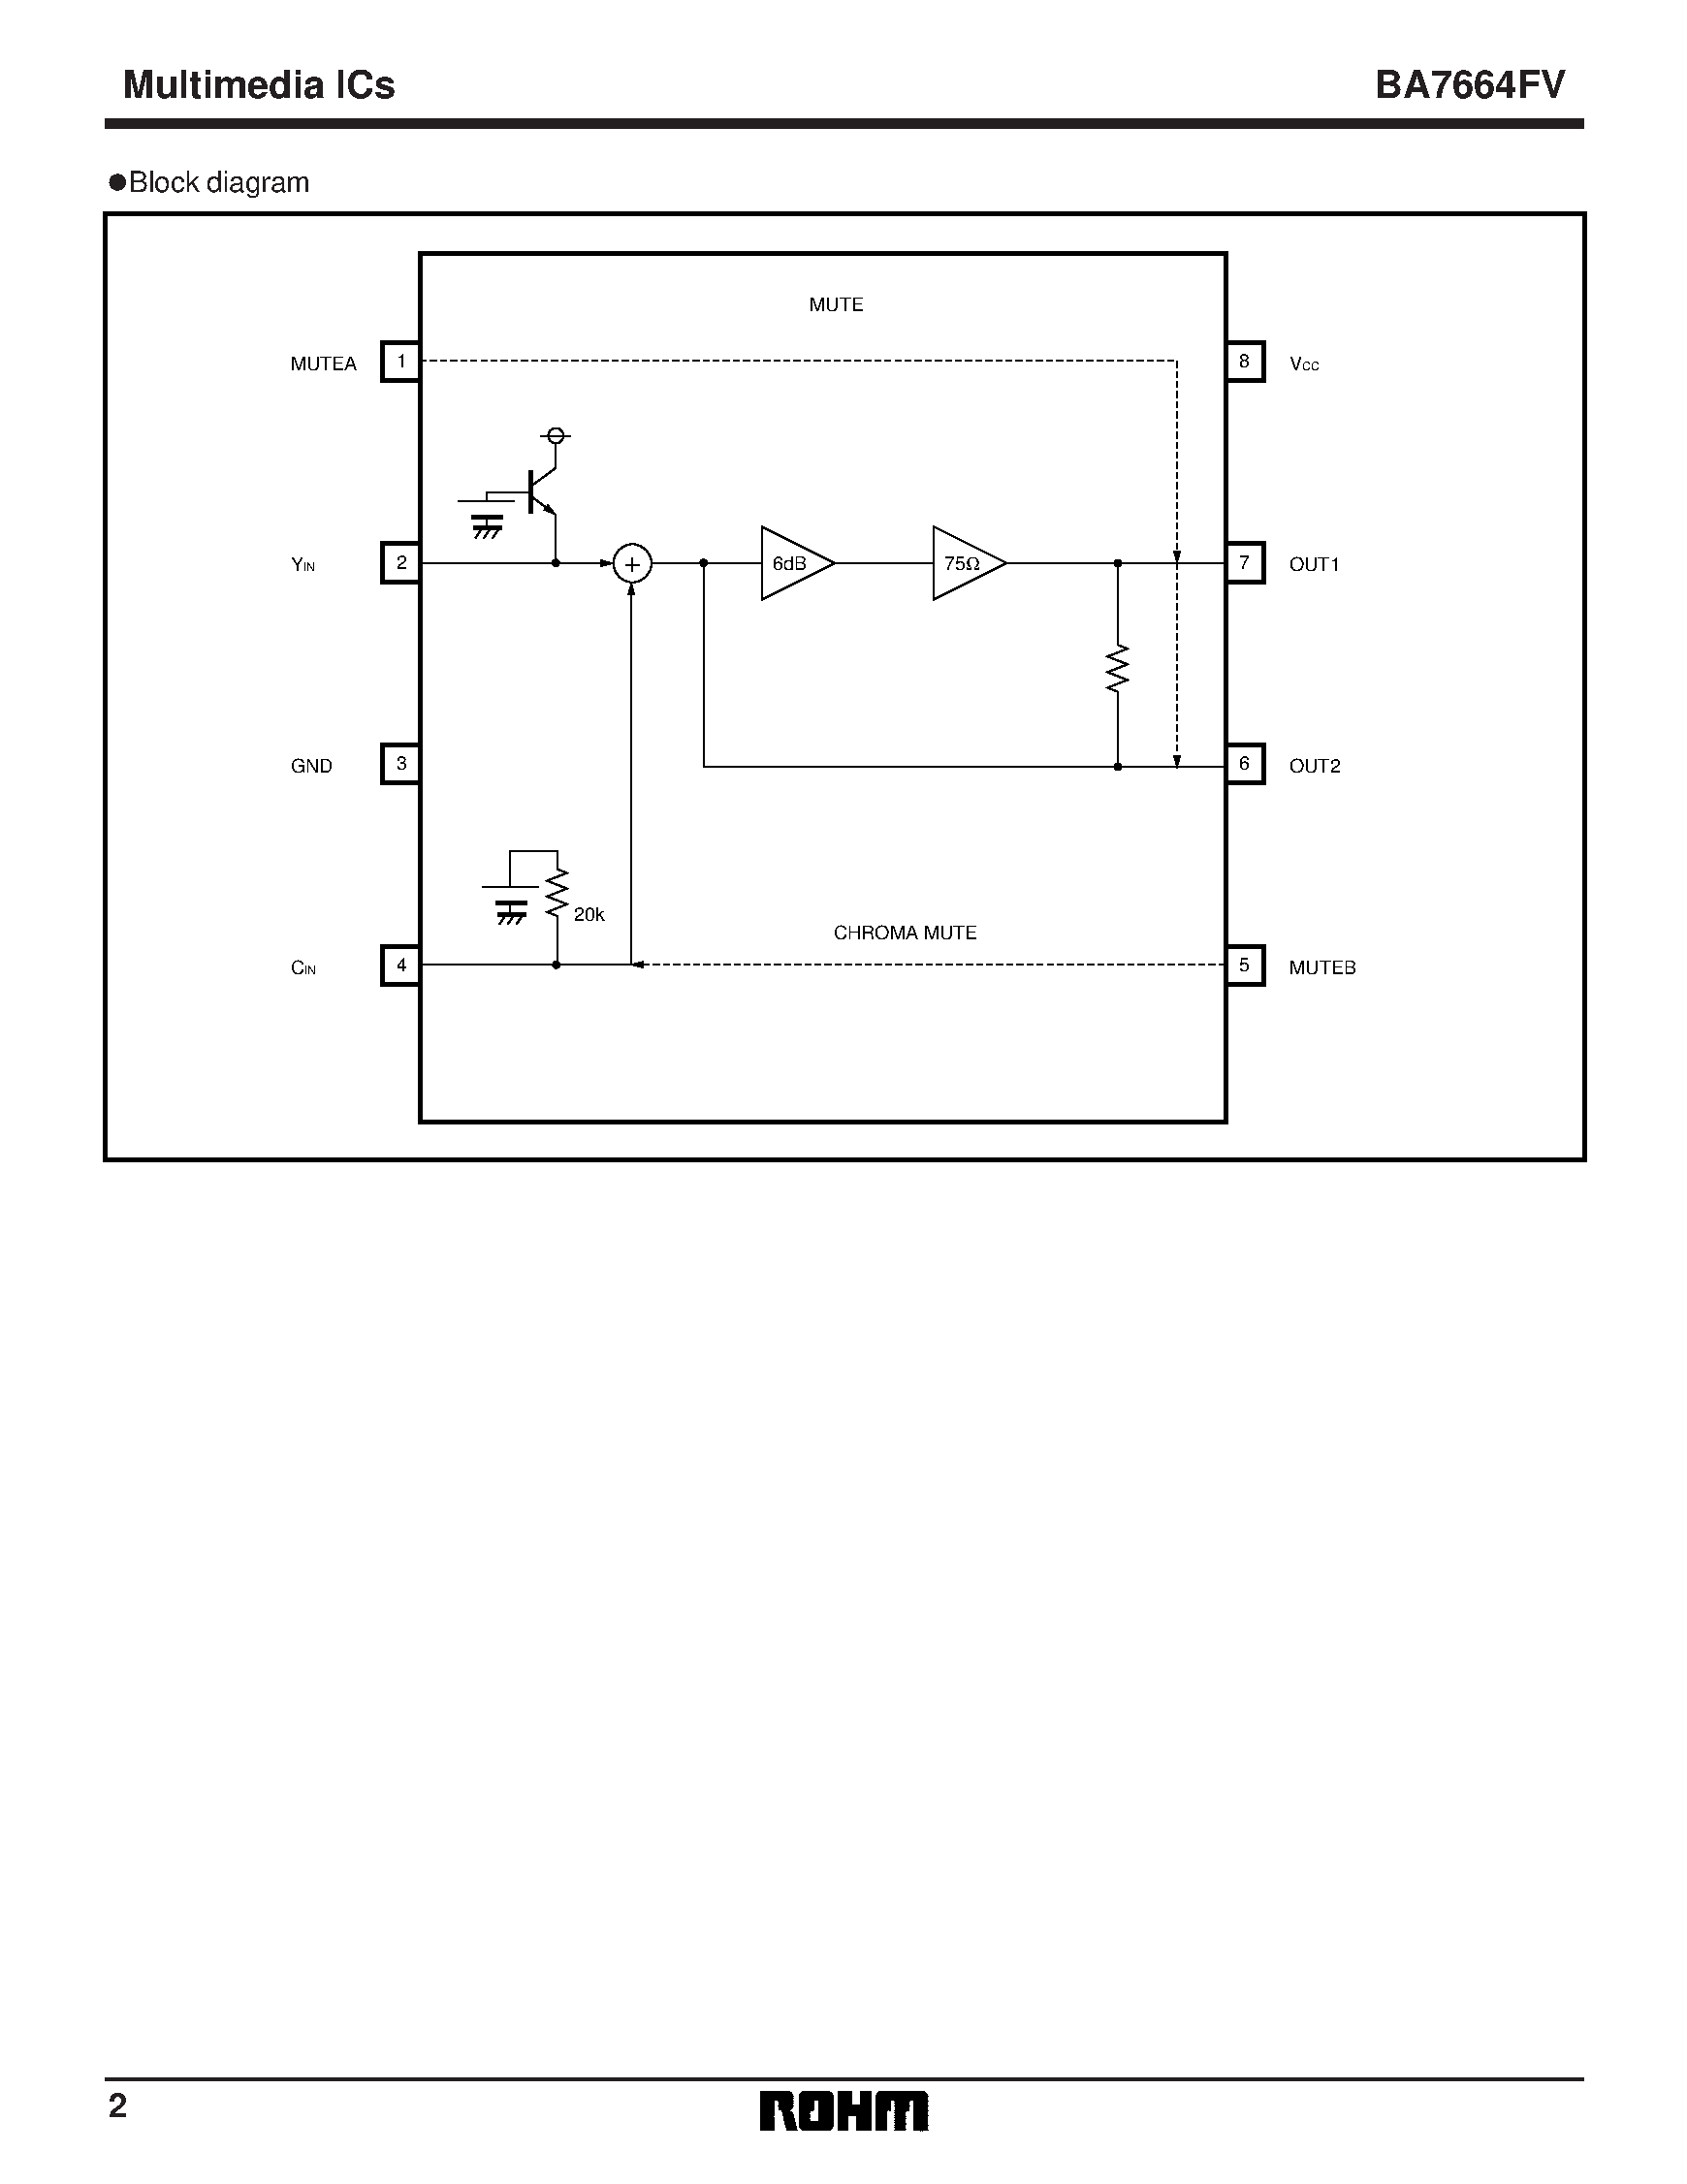 Datasheet BA7664FV - 75 driver with Y / C MIX circuit page 2